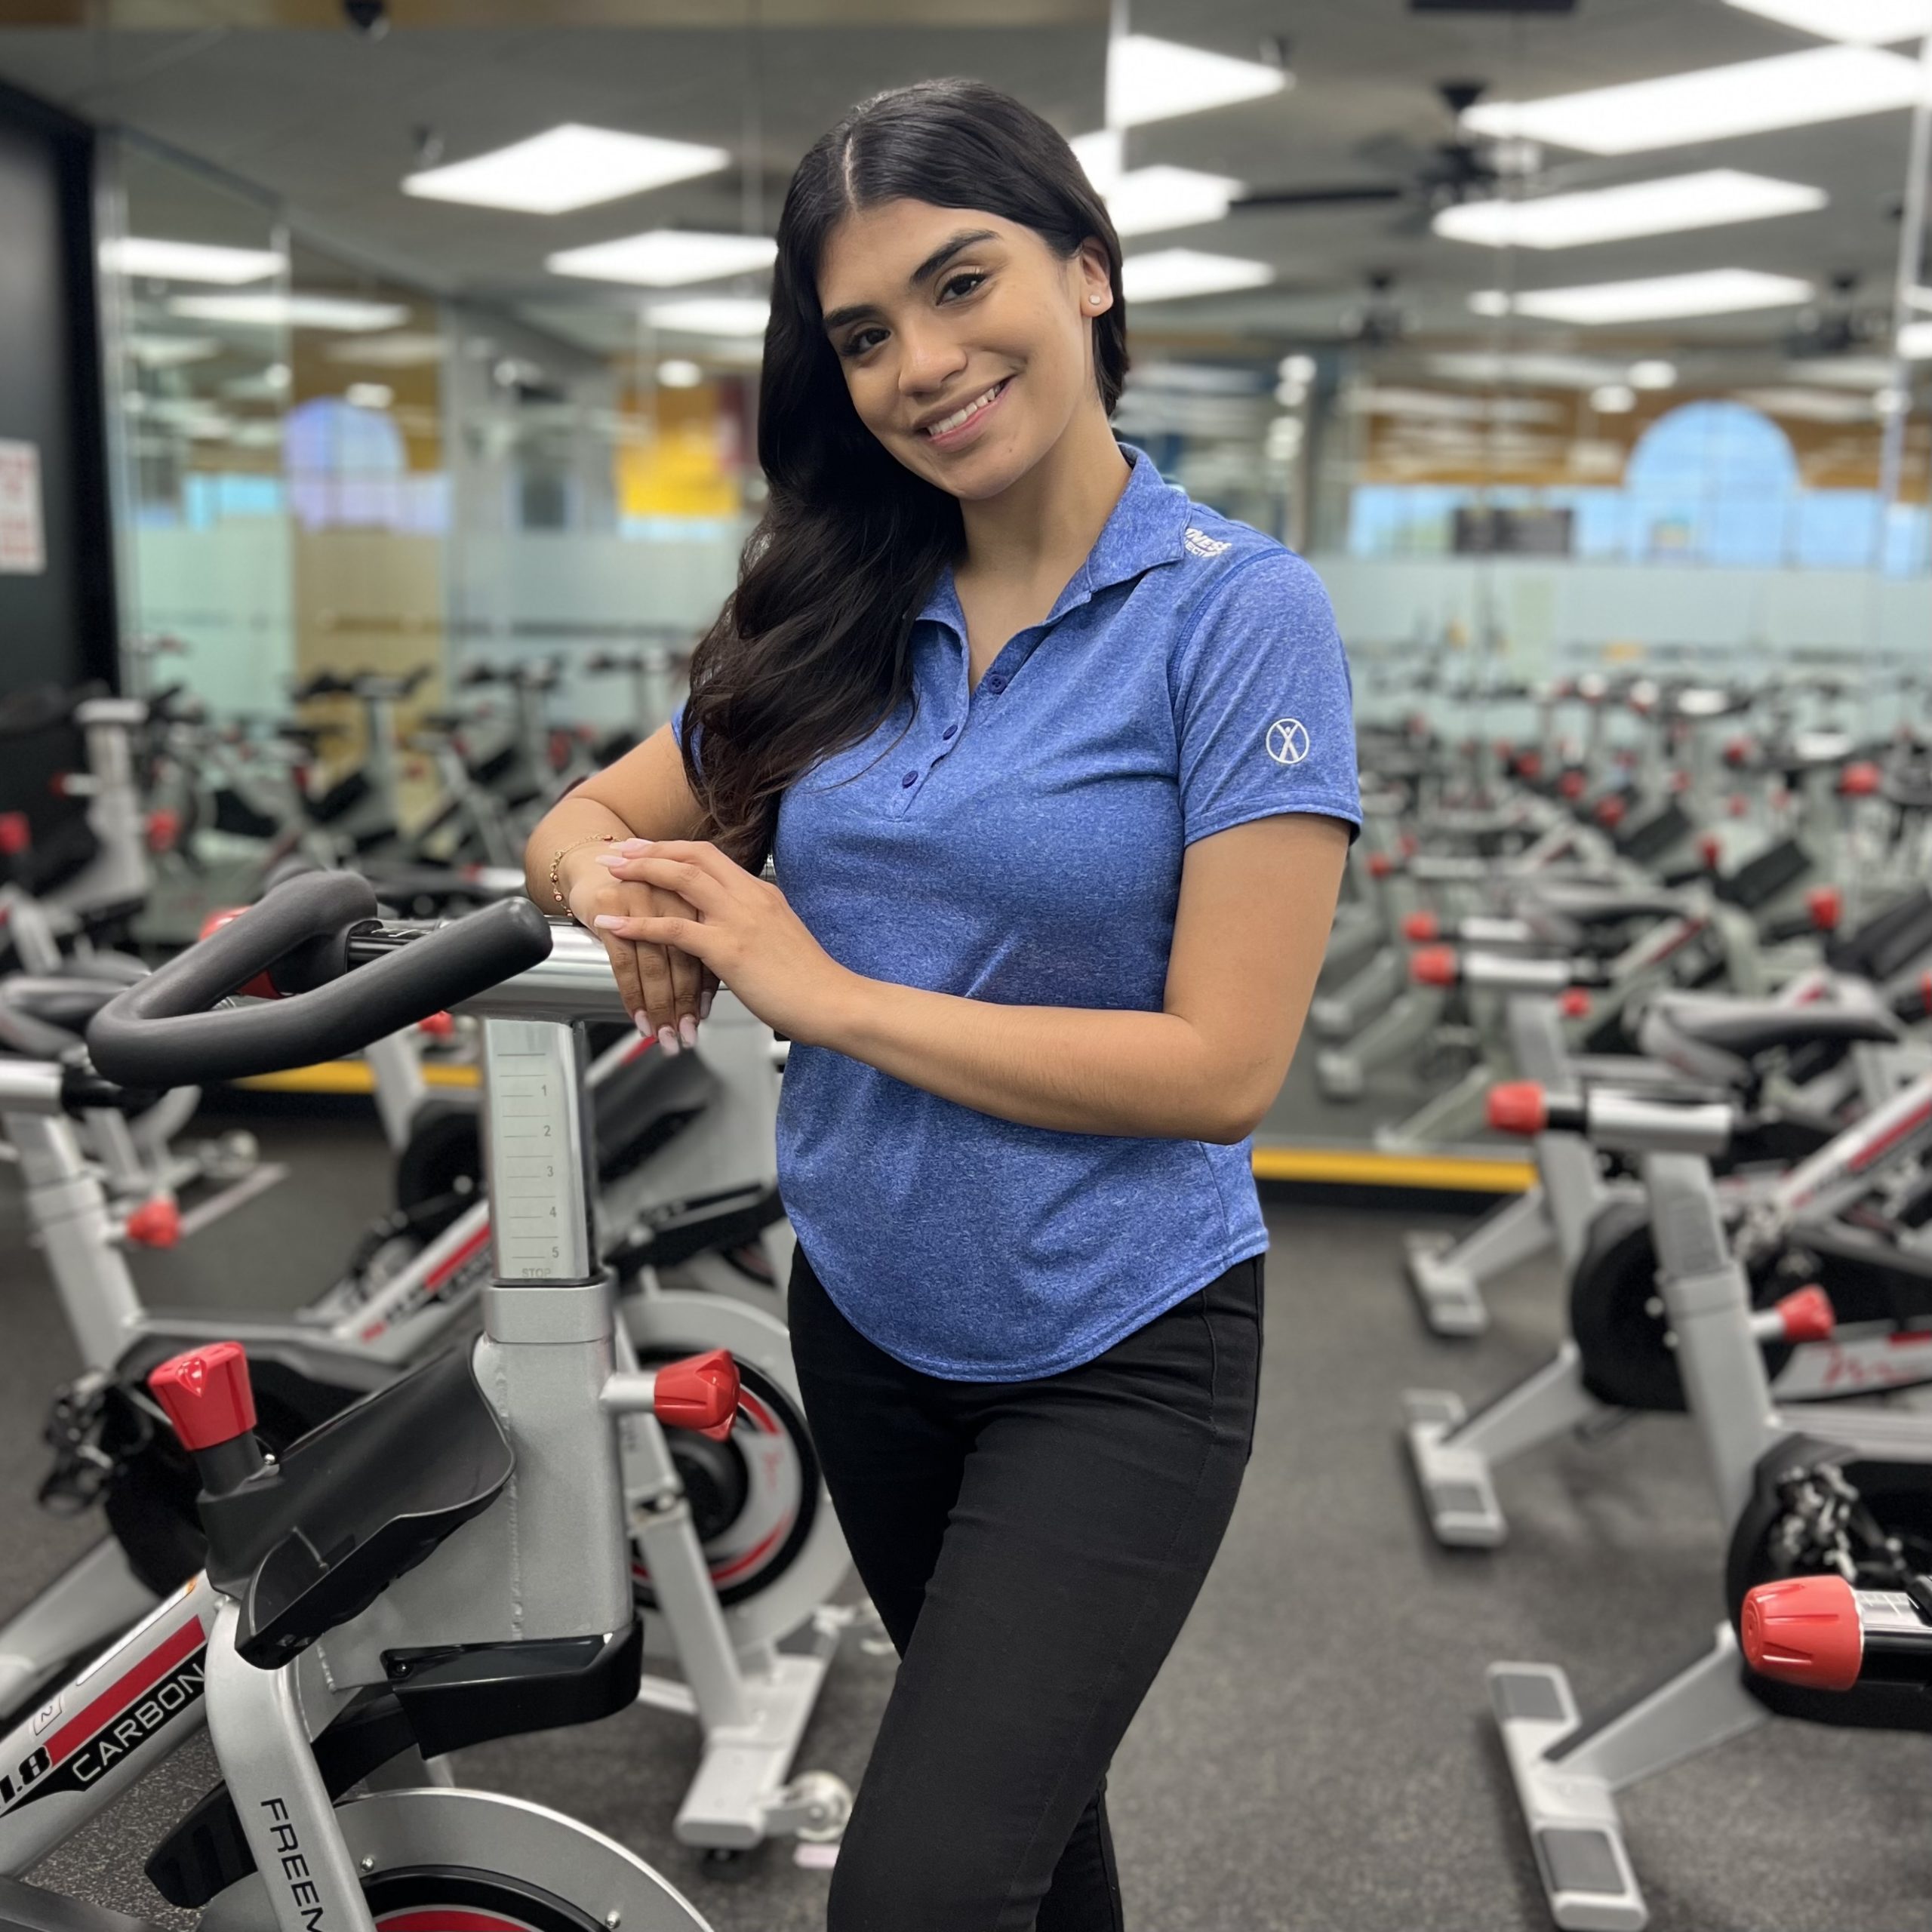 Club Manager at Fitness Connection Baytown VanessaA